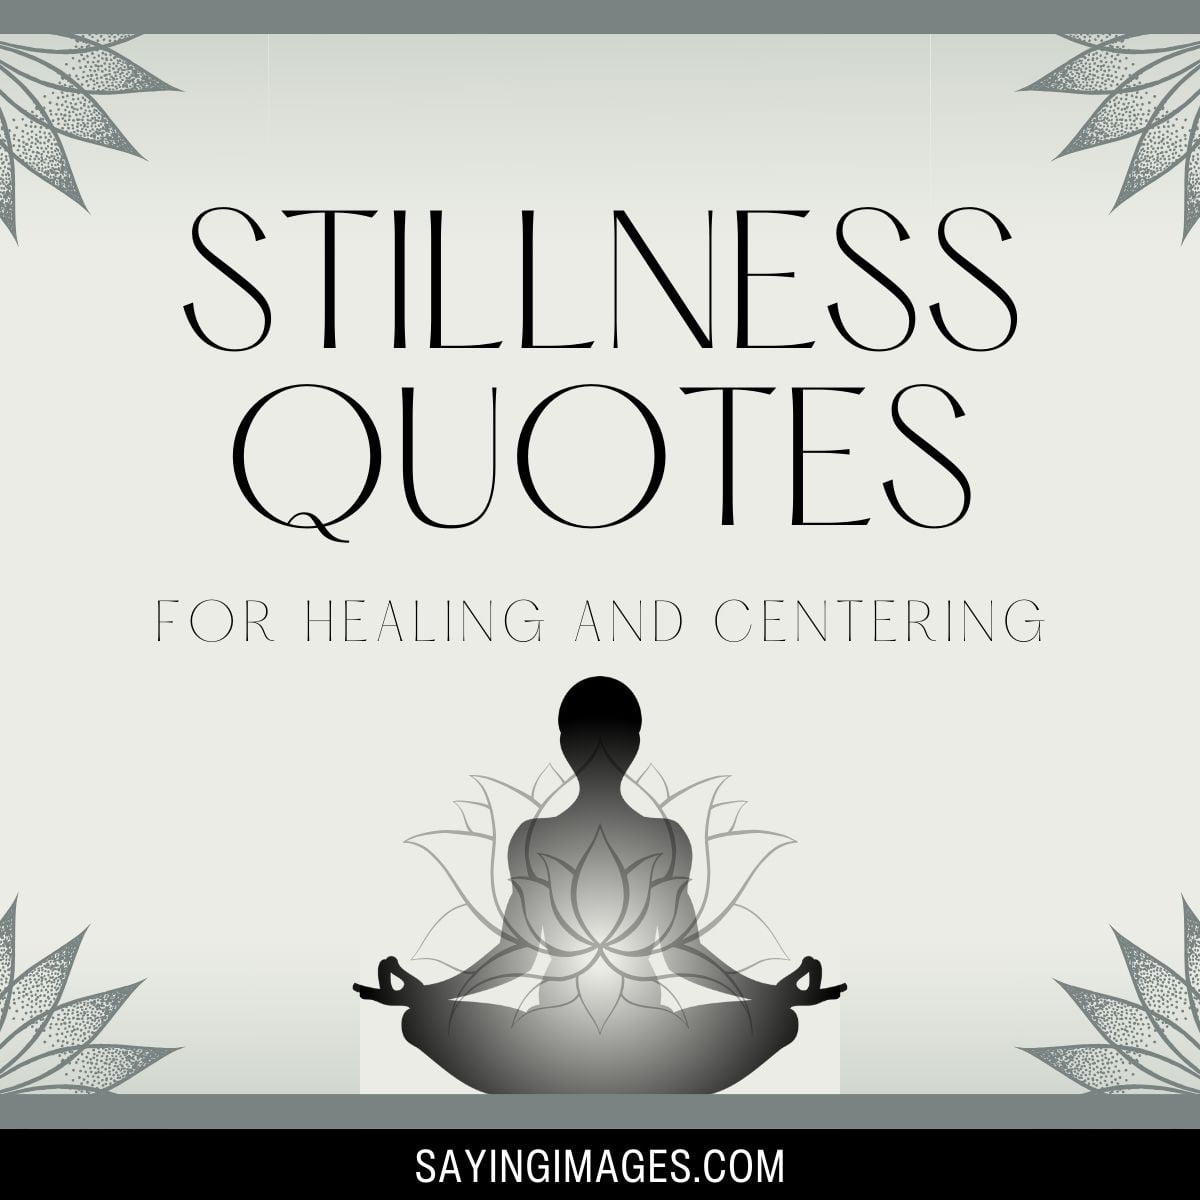 Stillness Quotes For Healing And Centering